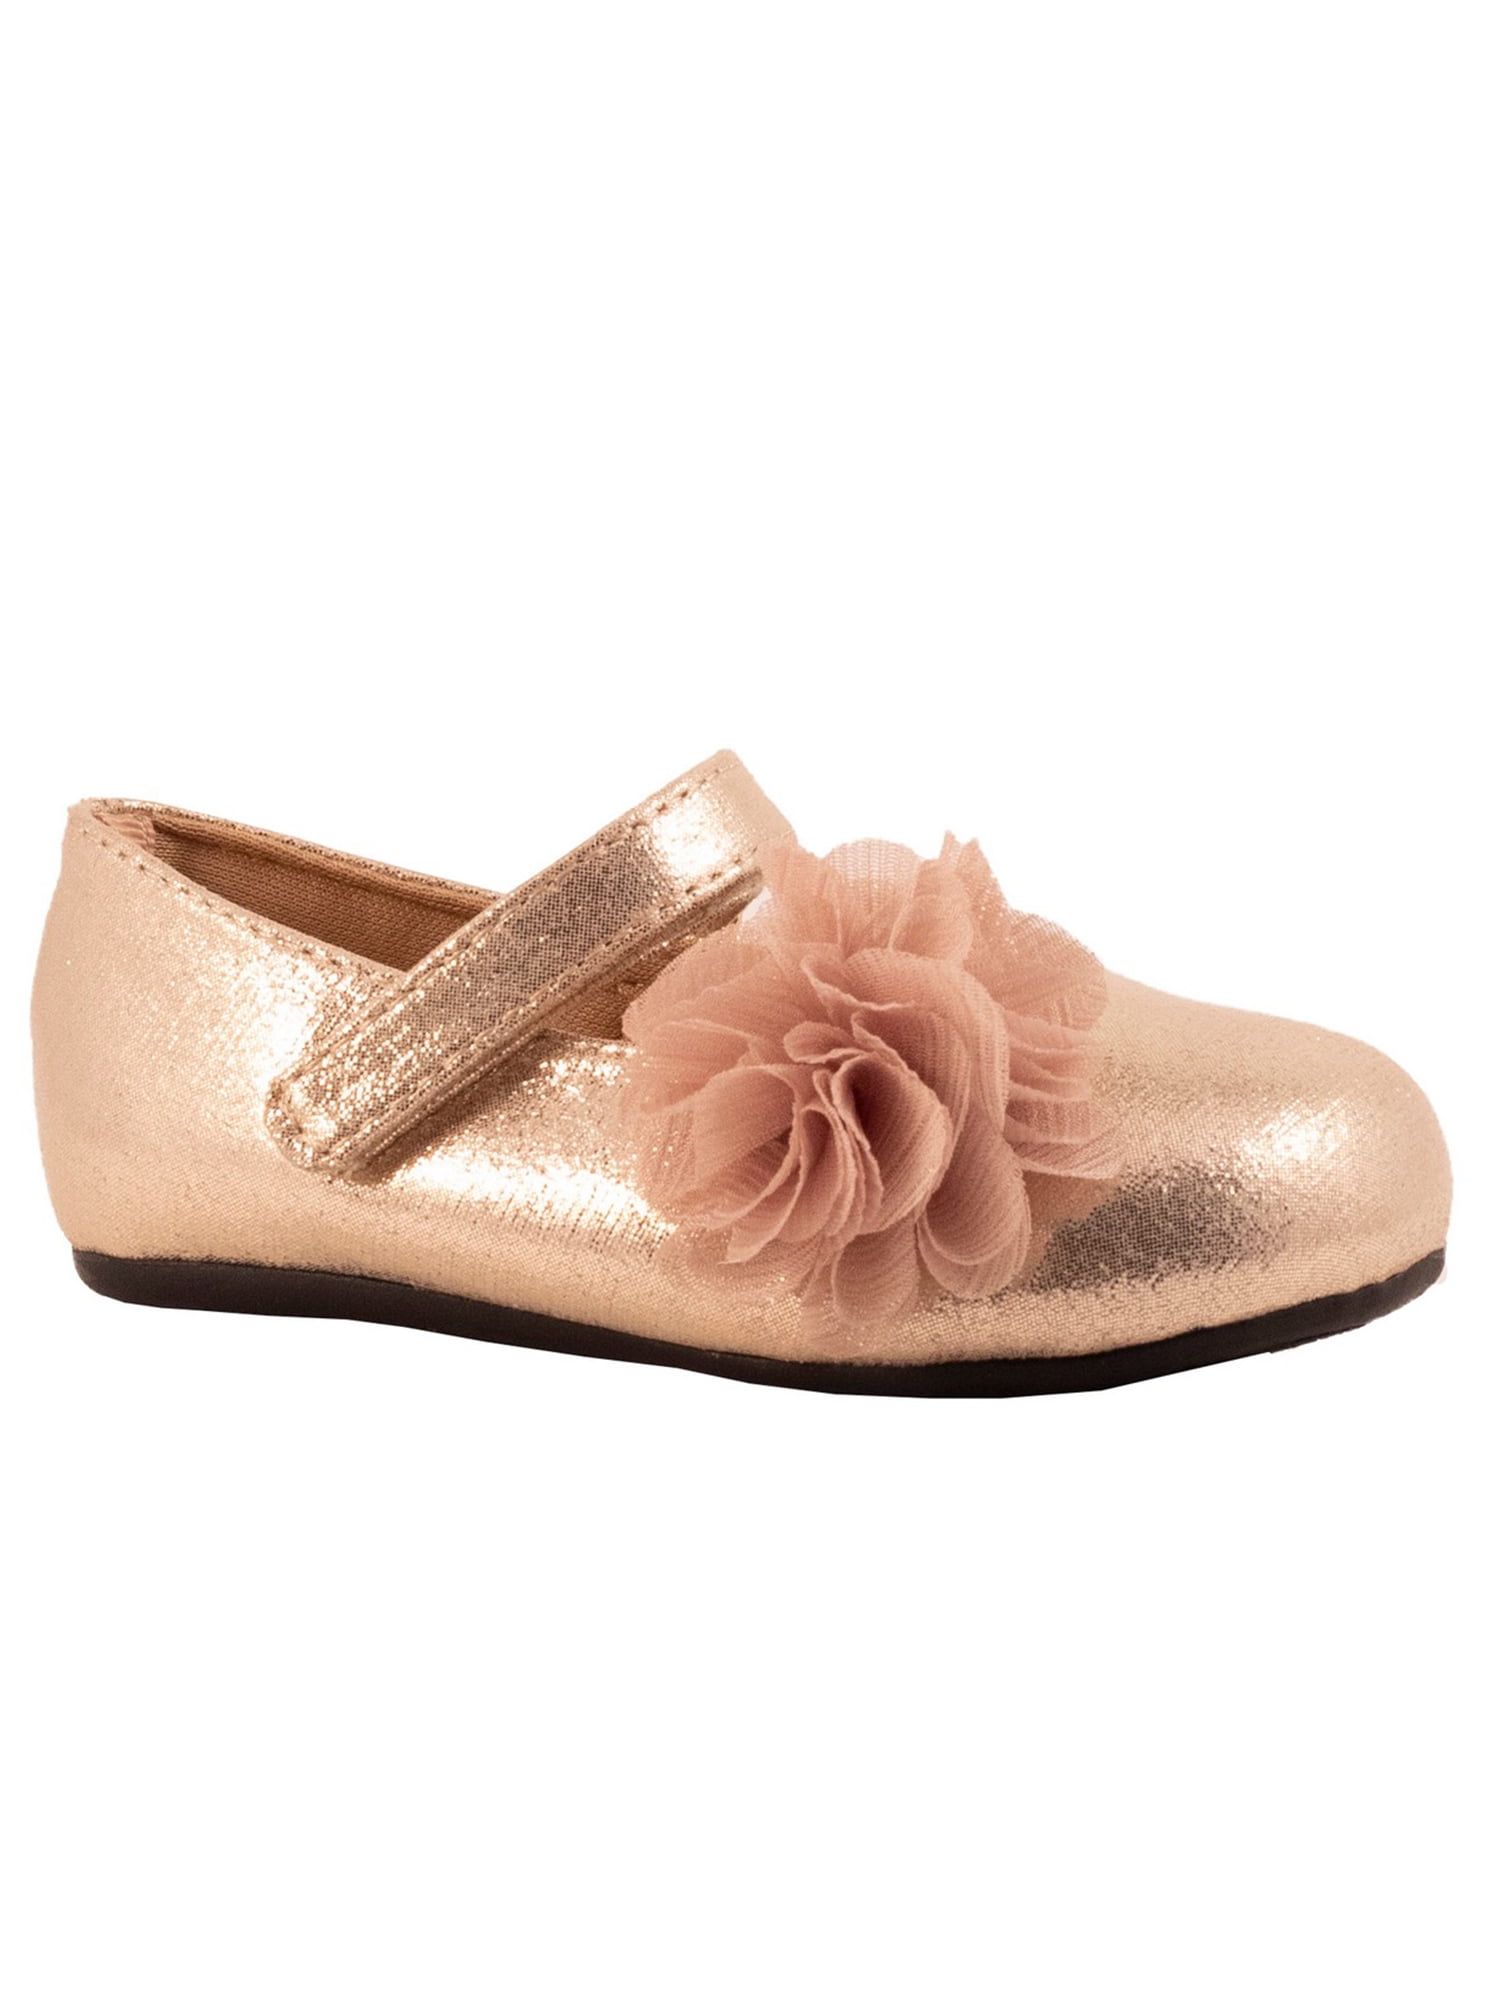 little girl champagne shoes